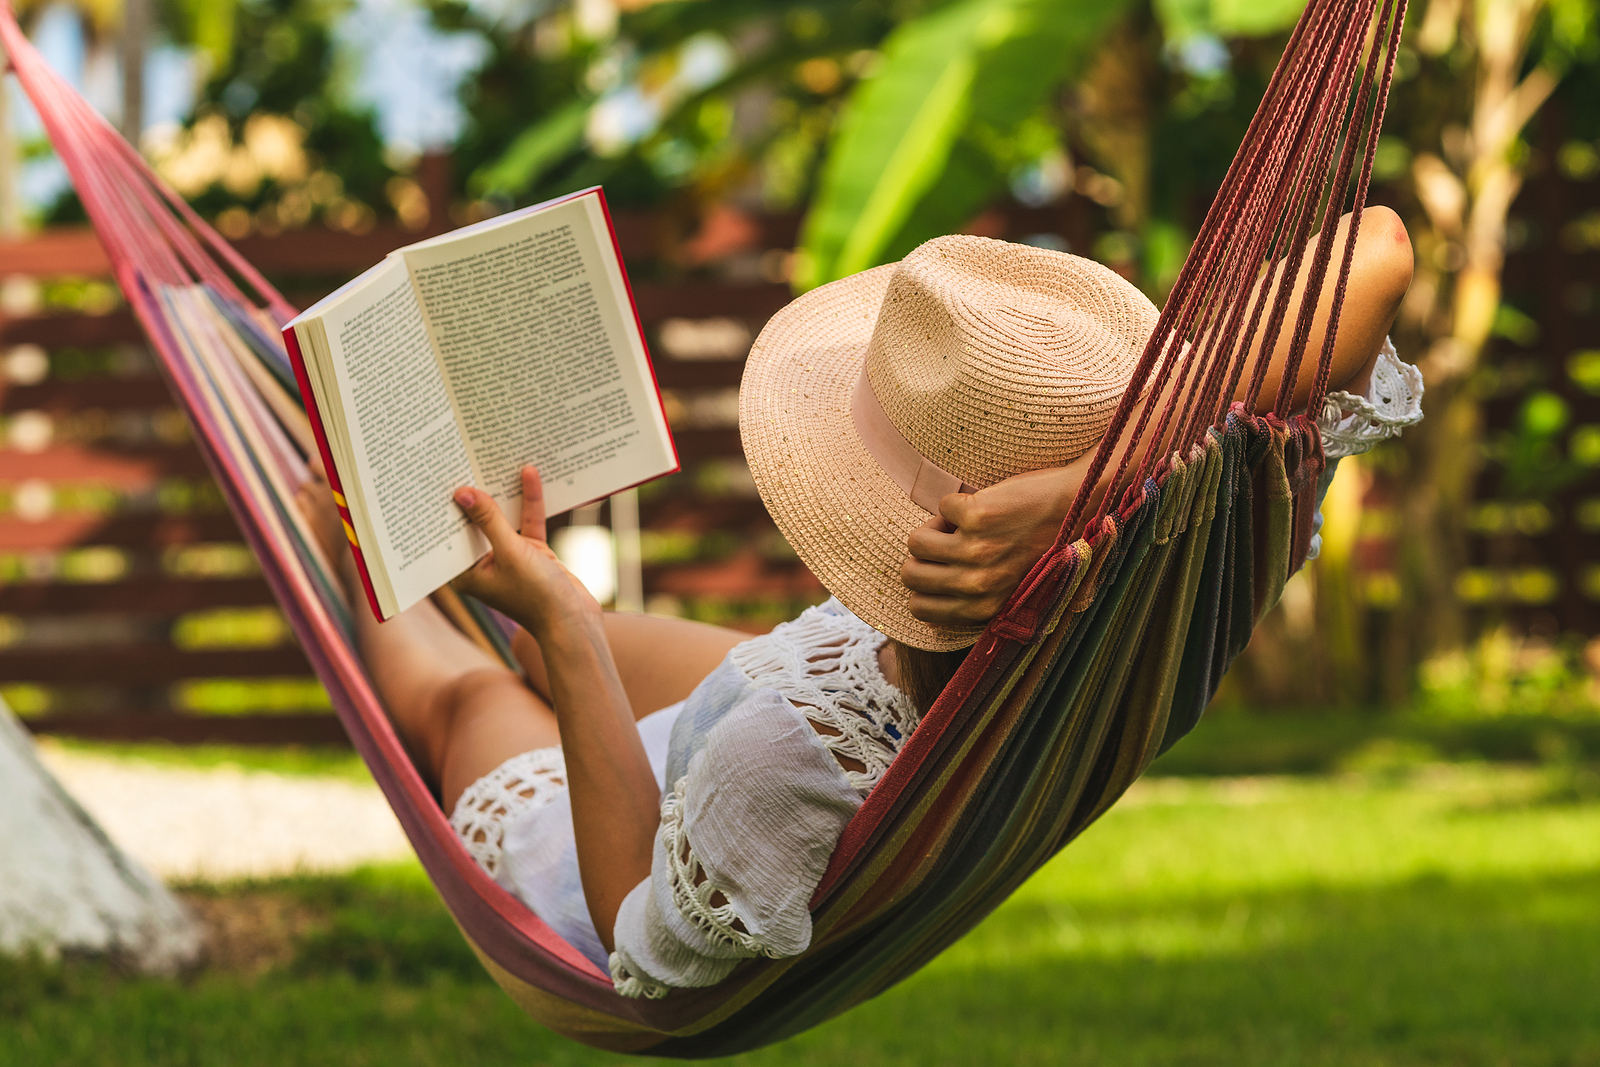 reading recommendations for summer